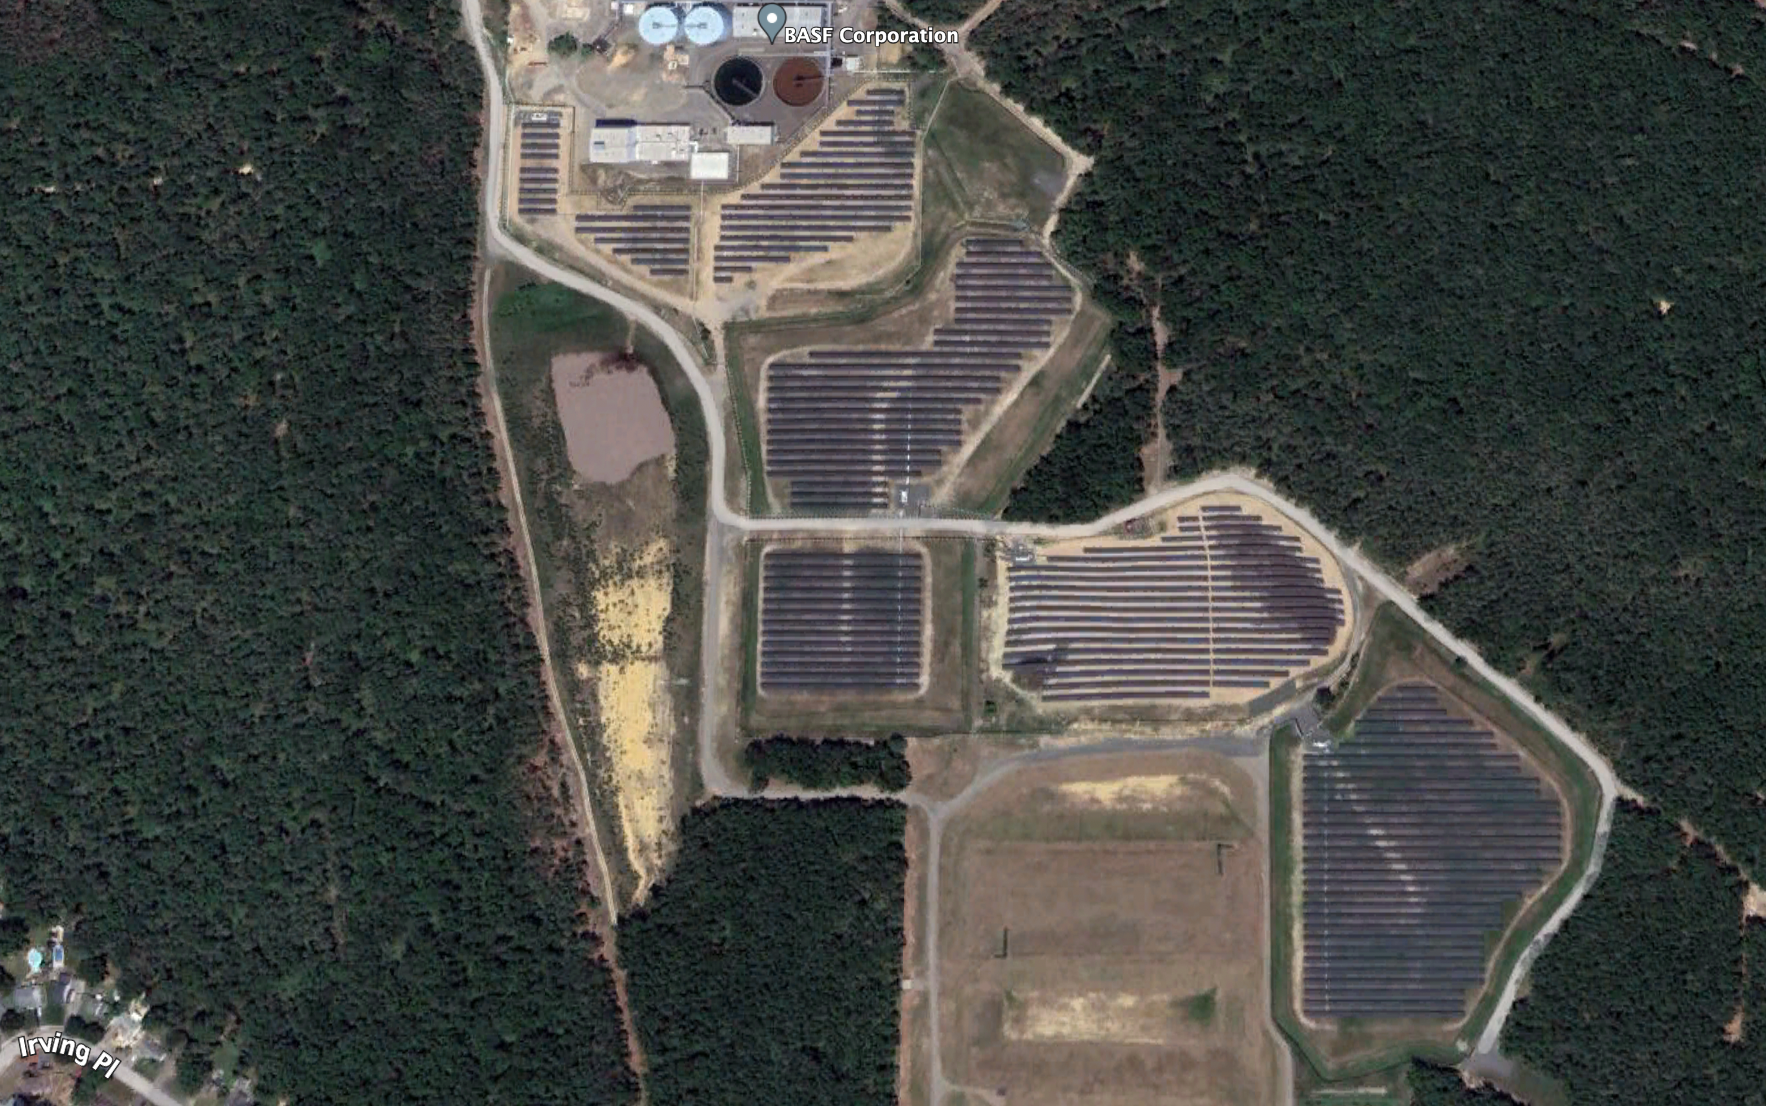 Solar panels installed on parts of the former Ciba-Geigy site in Toms River, NJ. (Google Earth)